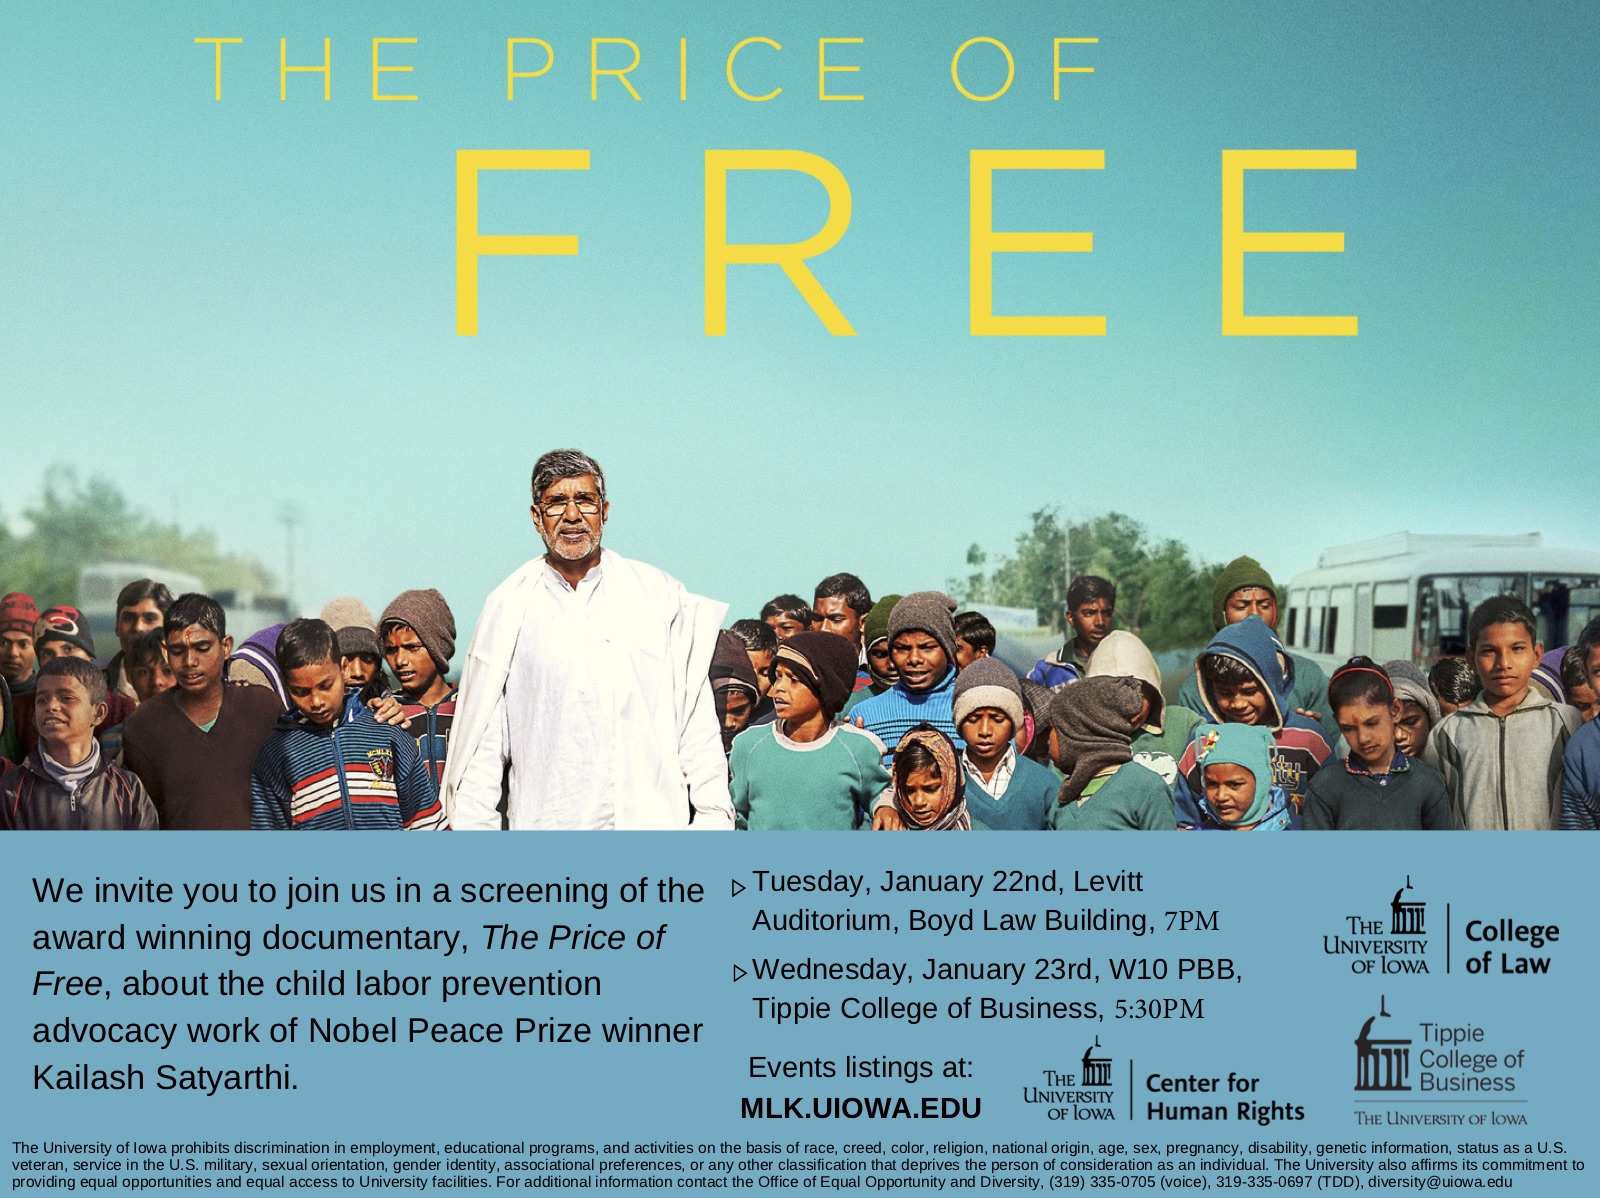 The Price of Free Documentary Viewing promotional image